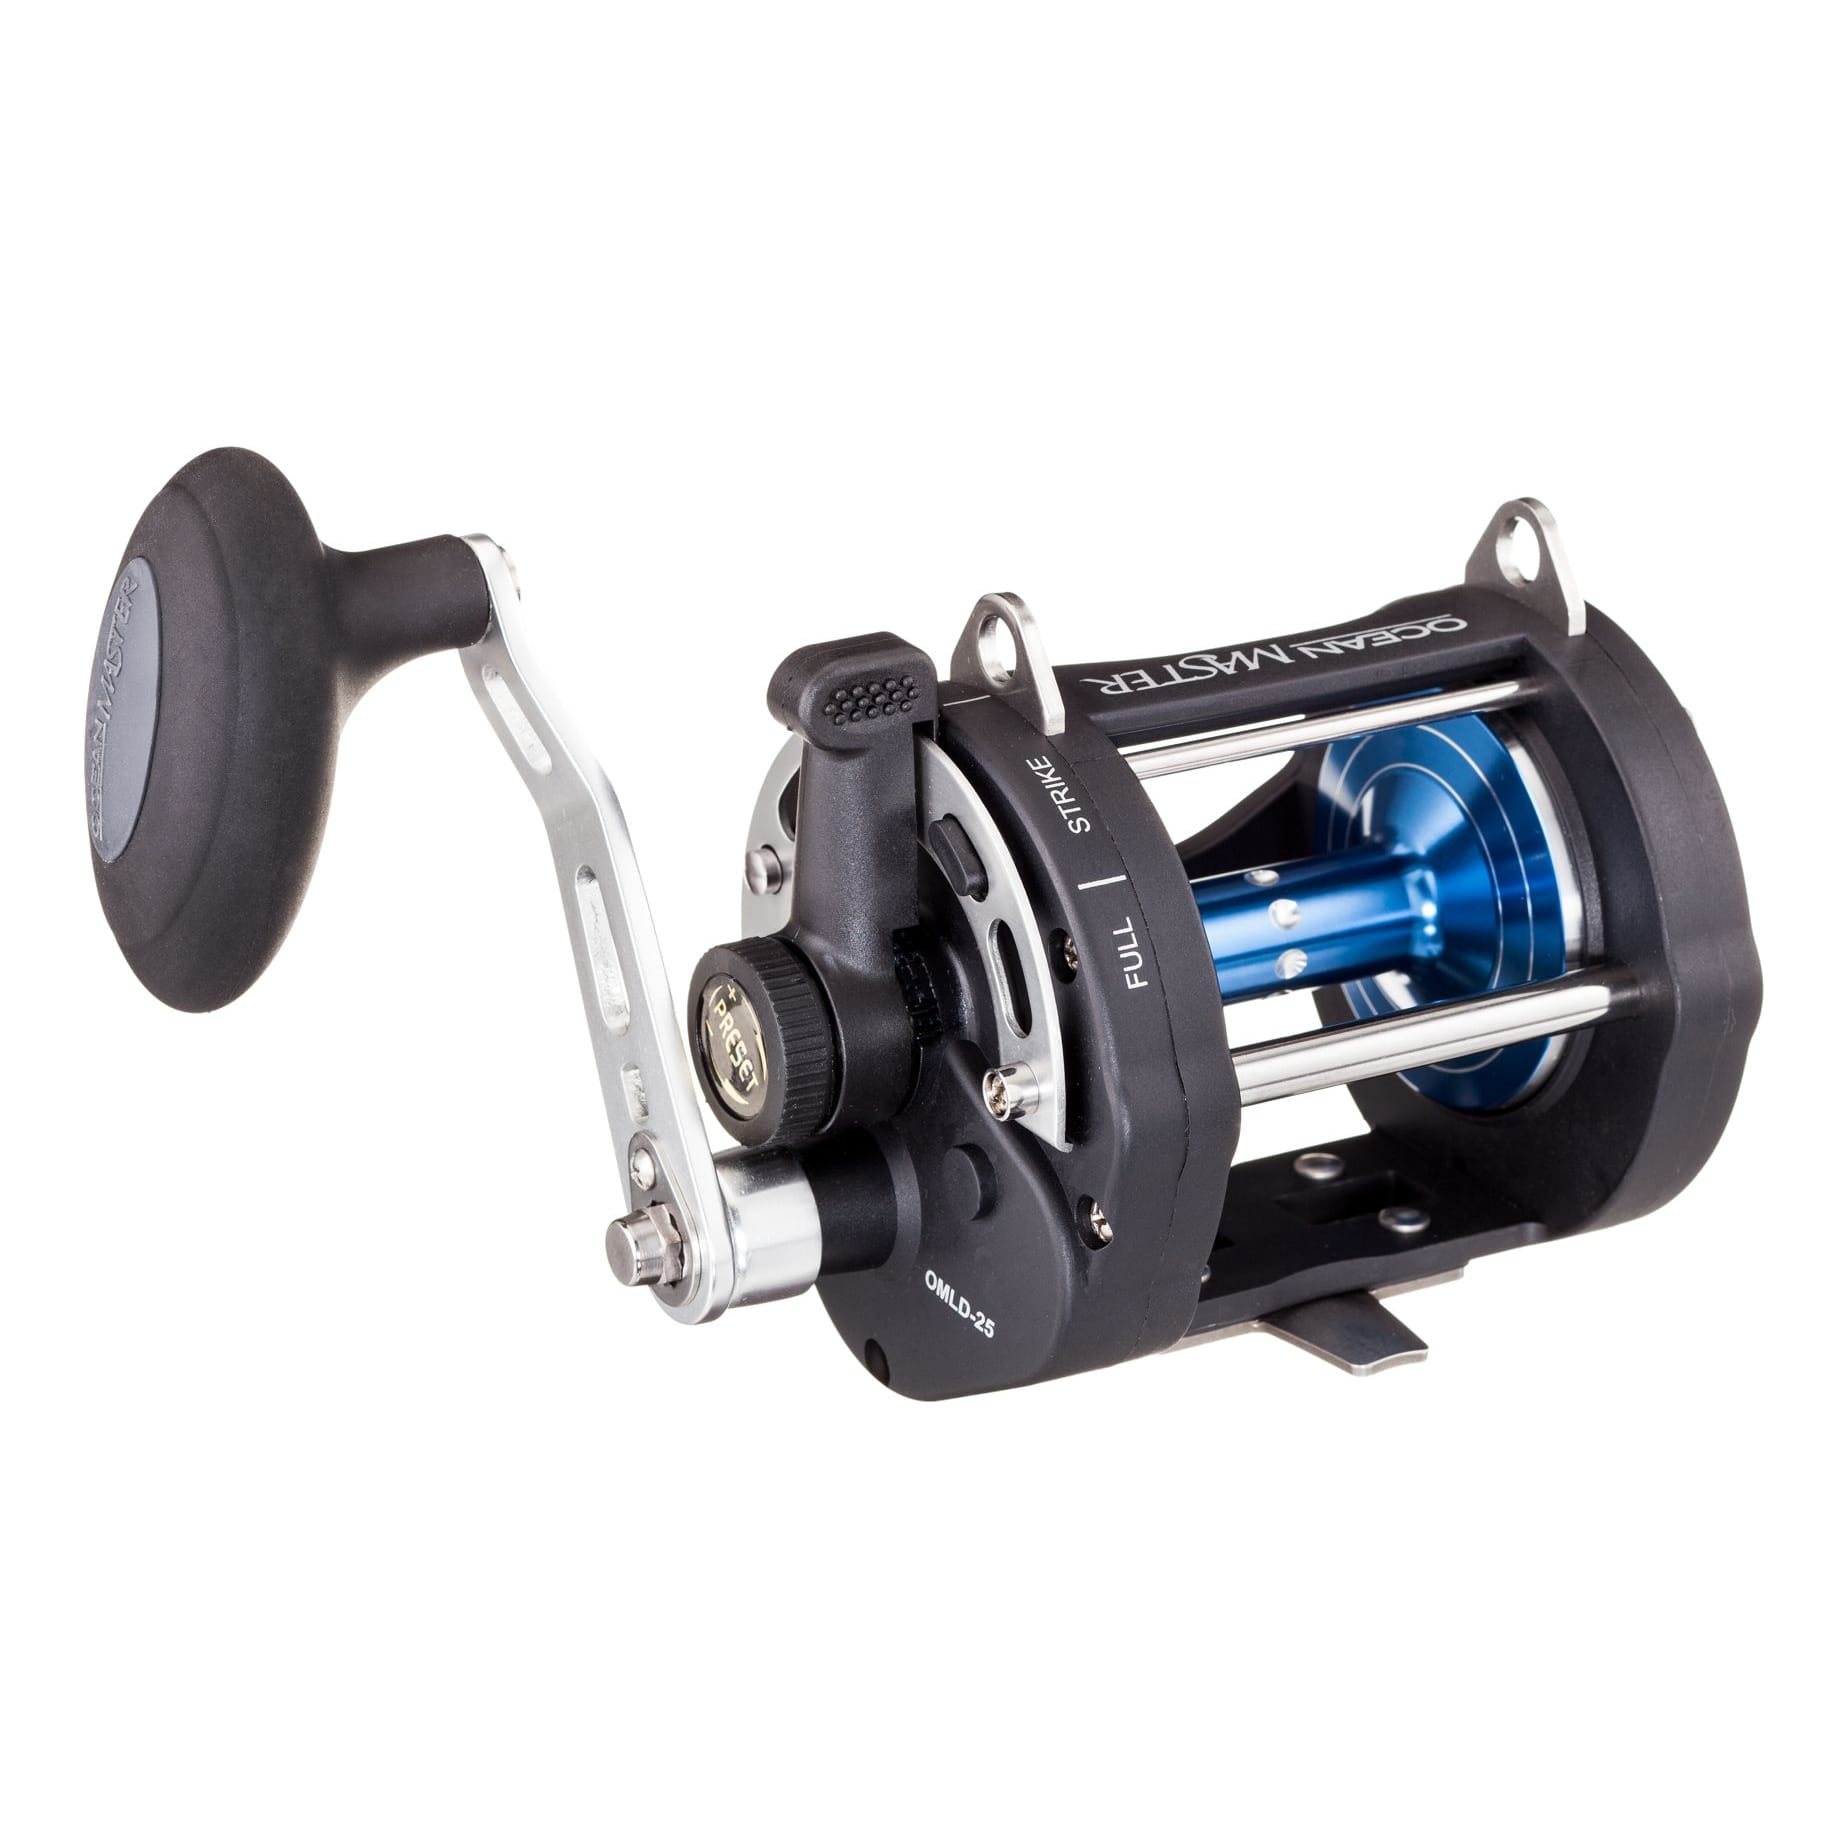 Fishing Conventional Reel Saltwater, Light Weight Ultra Smooth Spinning  Fishing Reel, for Catfish, Musky, Powerful Drag Fishing Reel for Saltwater